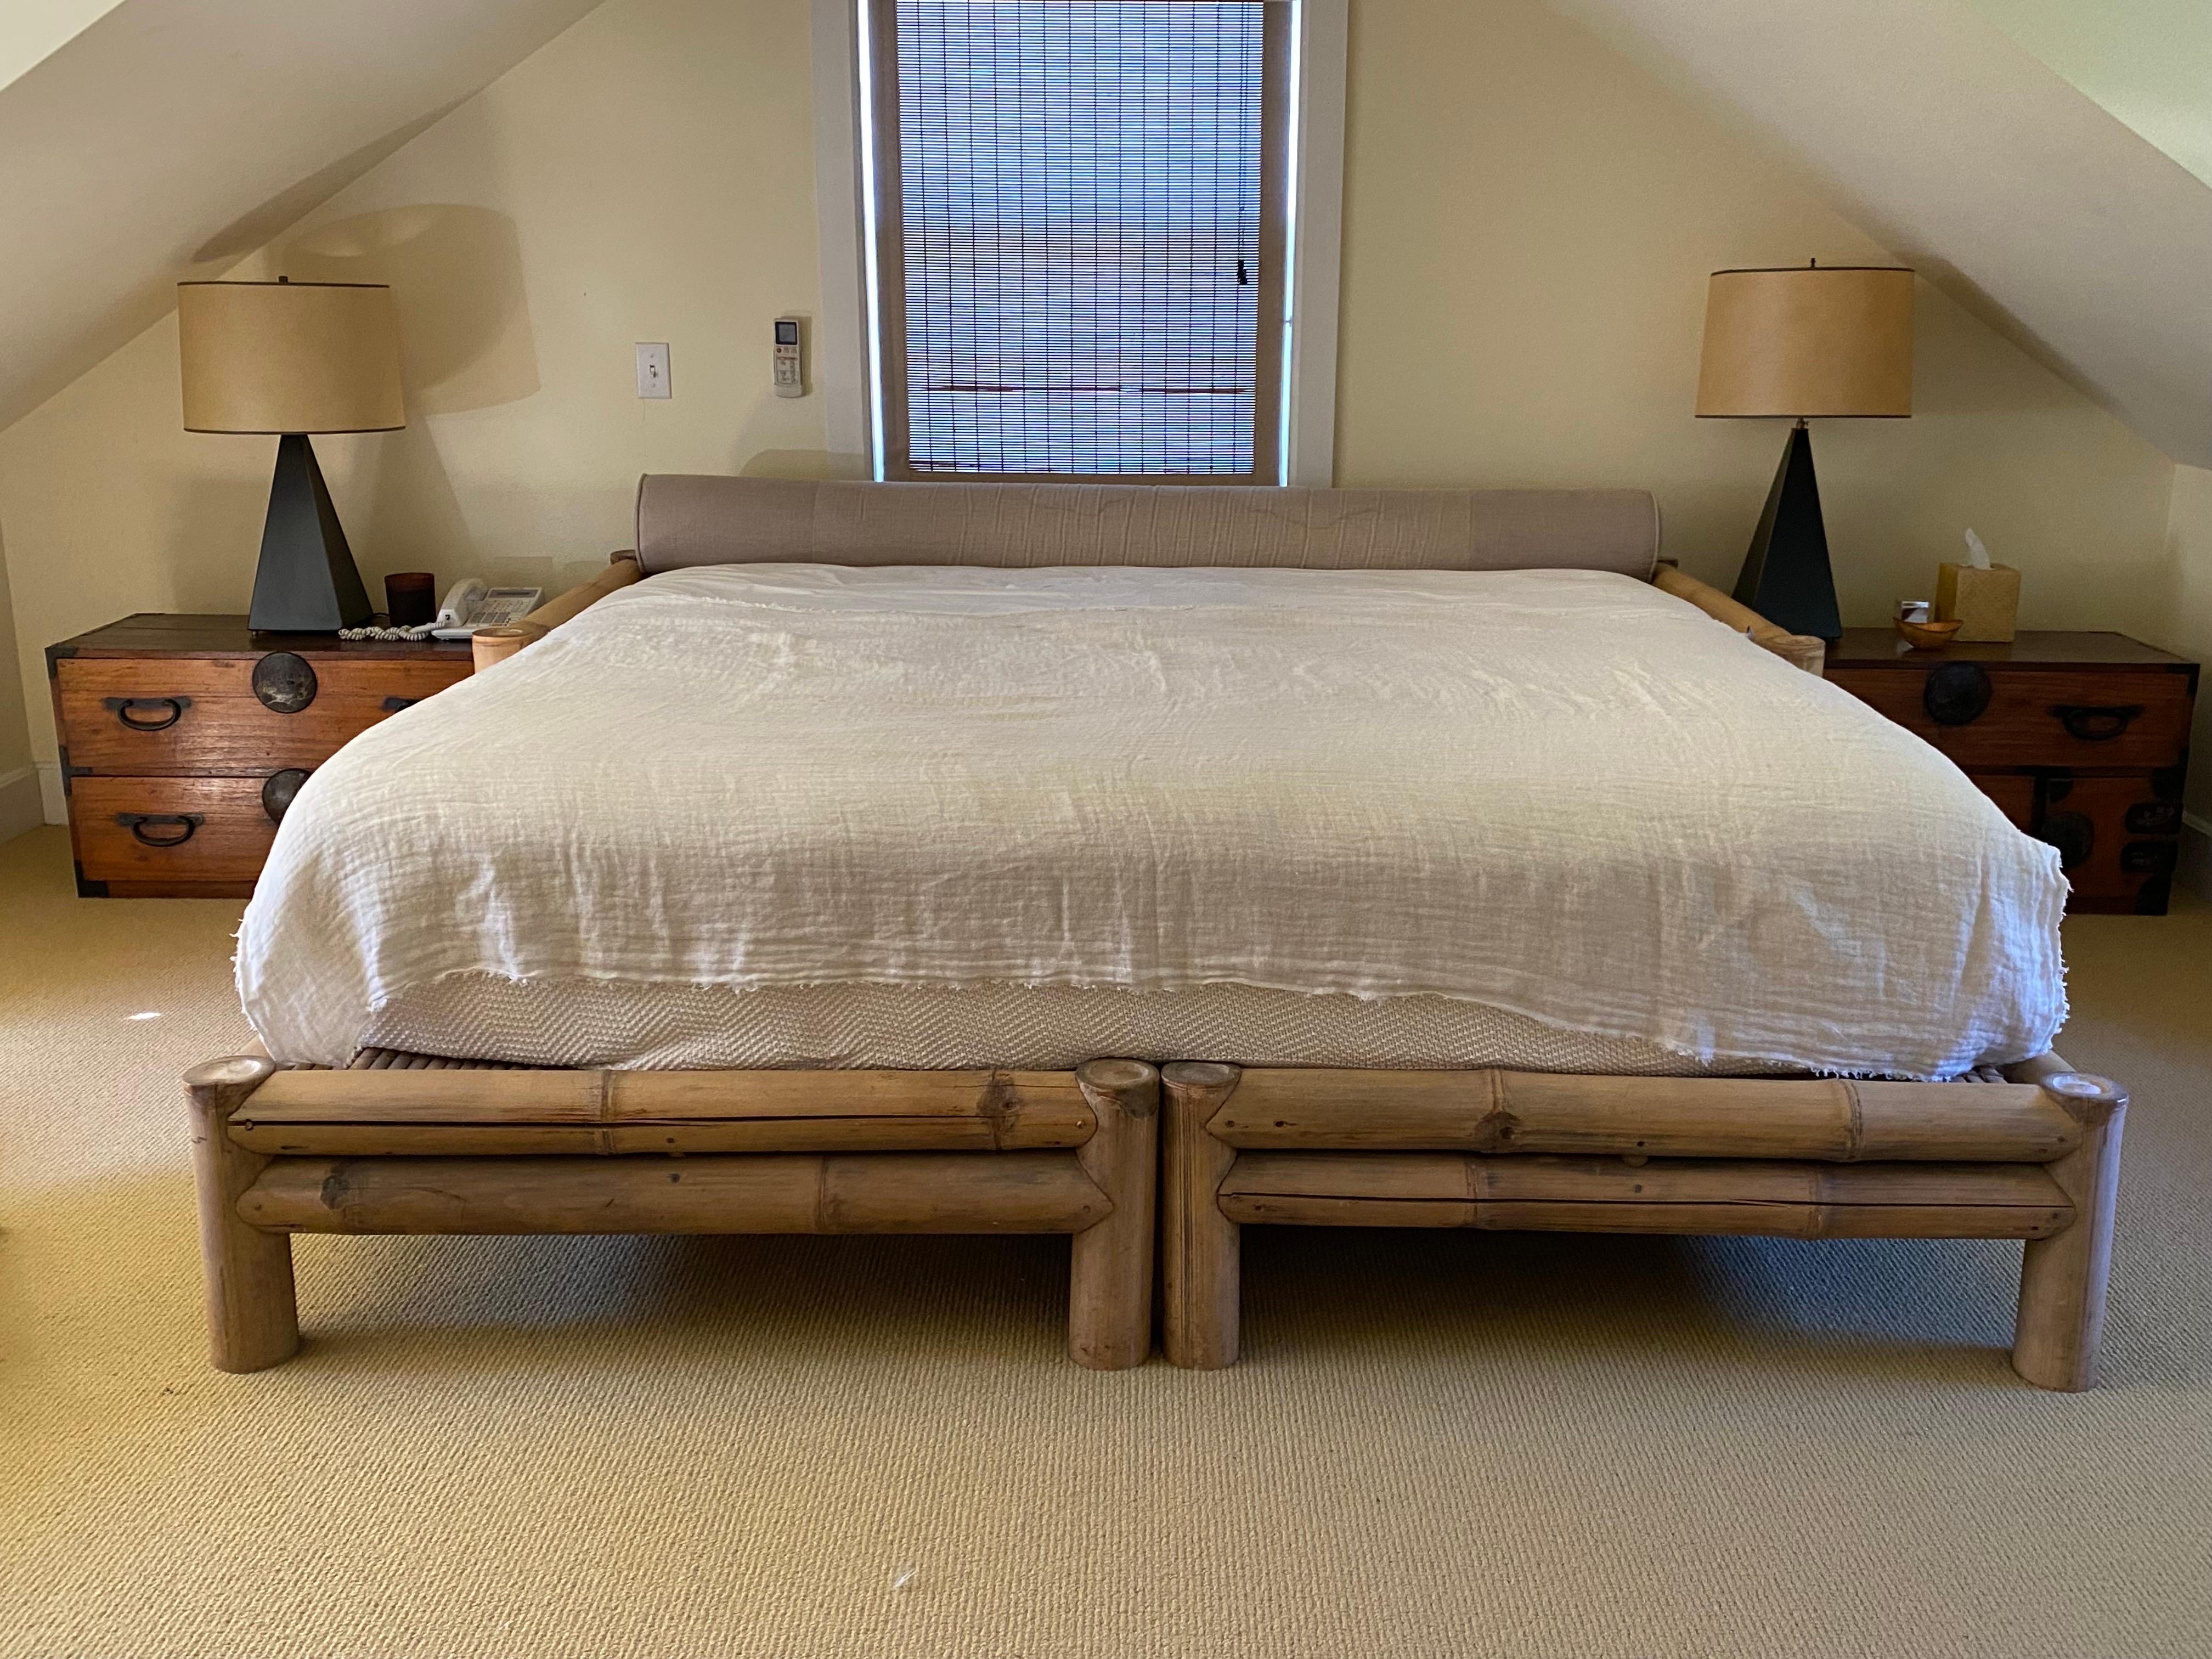 King Size Large Bamboo Bed Frame
Two twin sized double layer extra large diameter bamboo rods make up frame bases with single large bamboo arms on either side of twin bed to make up a king size bed. Bed is constructed entirely out of bamboo: rods, a